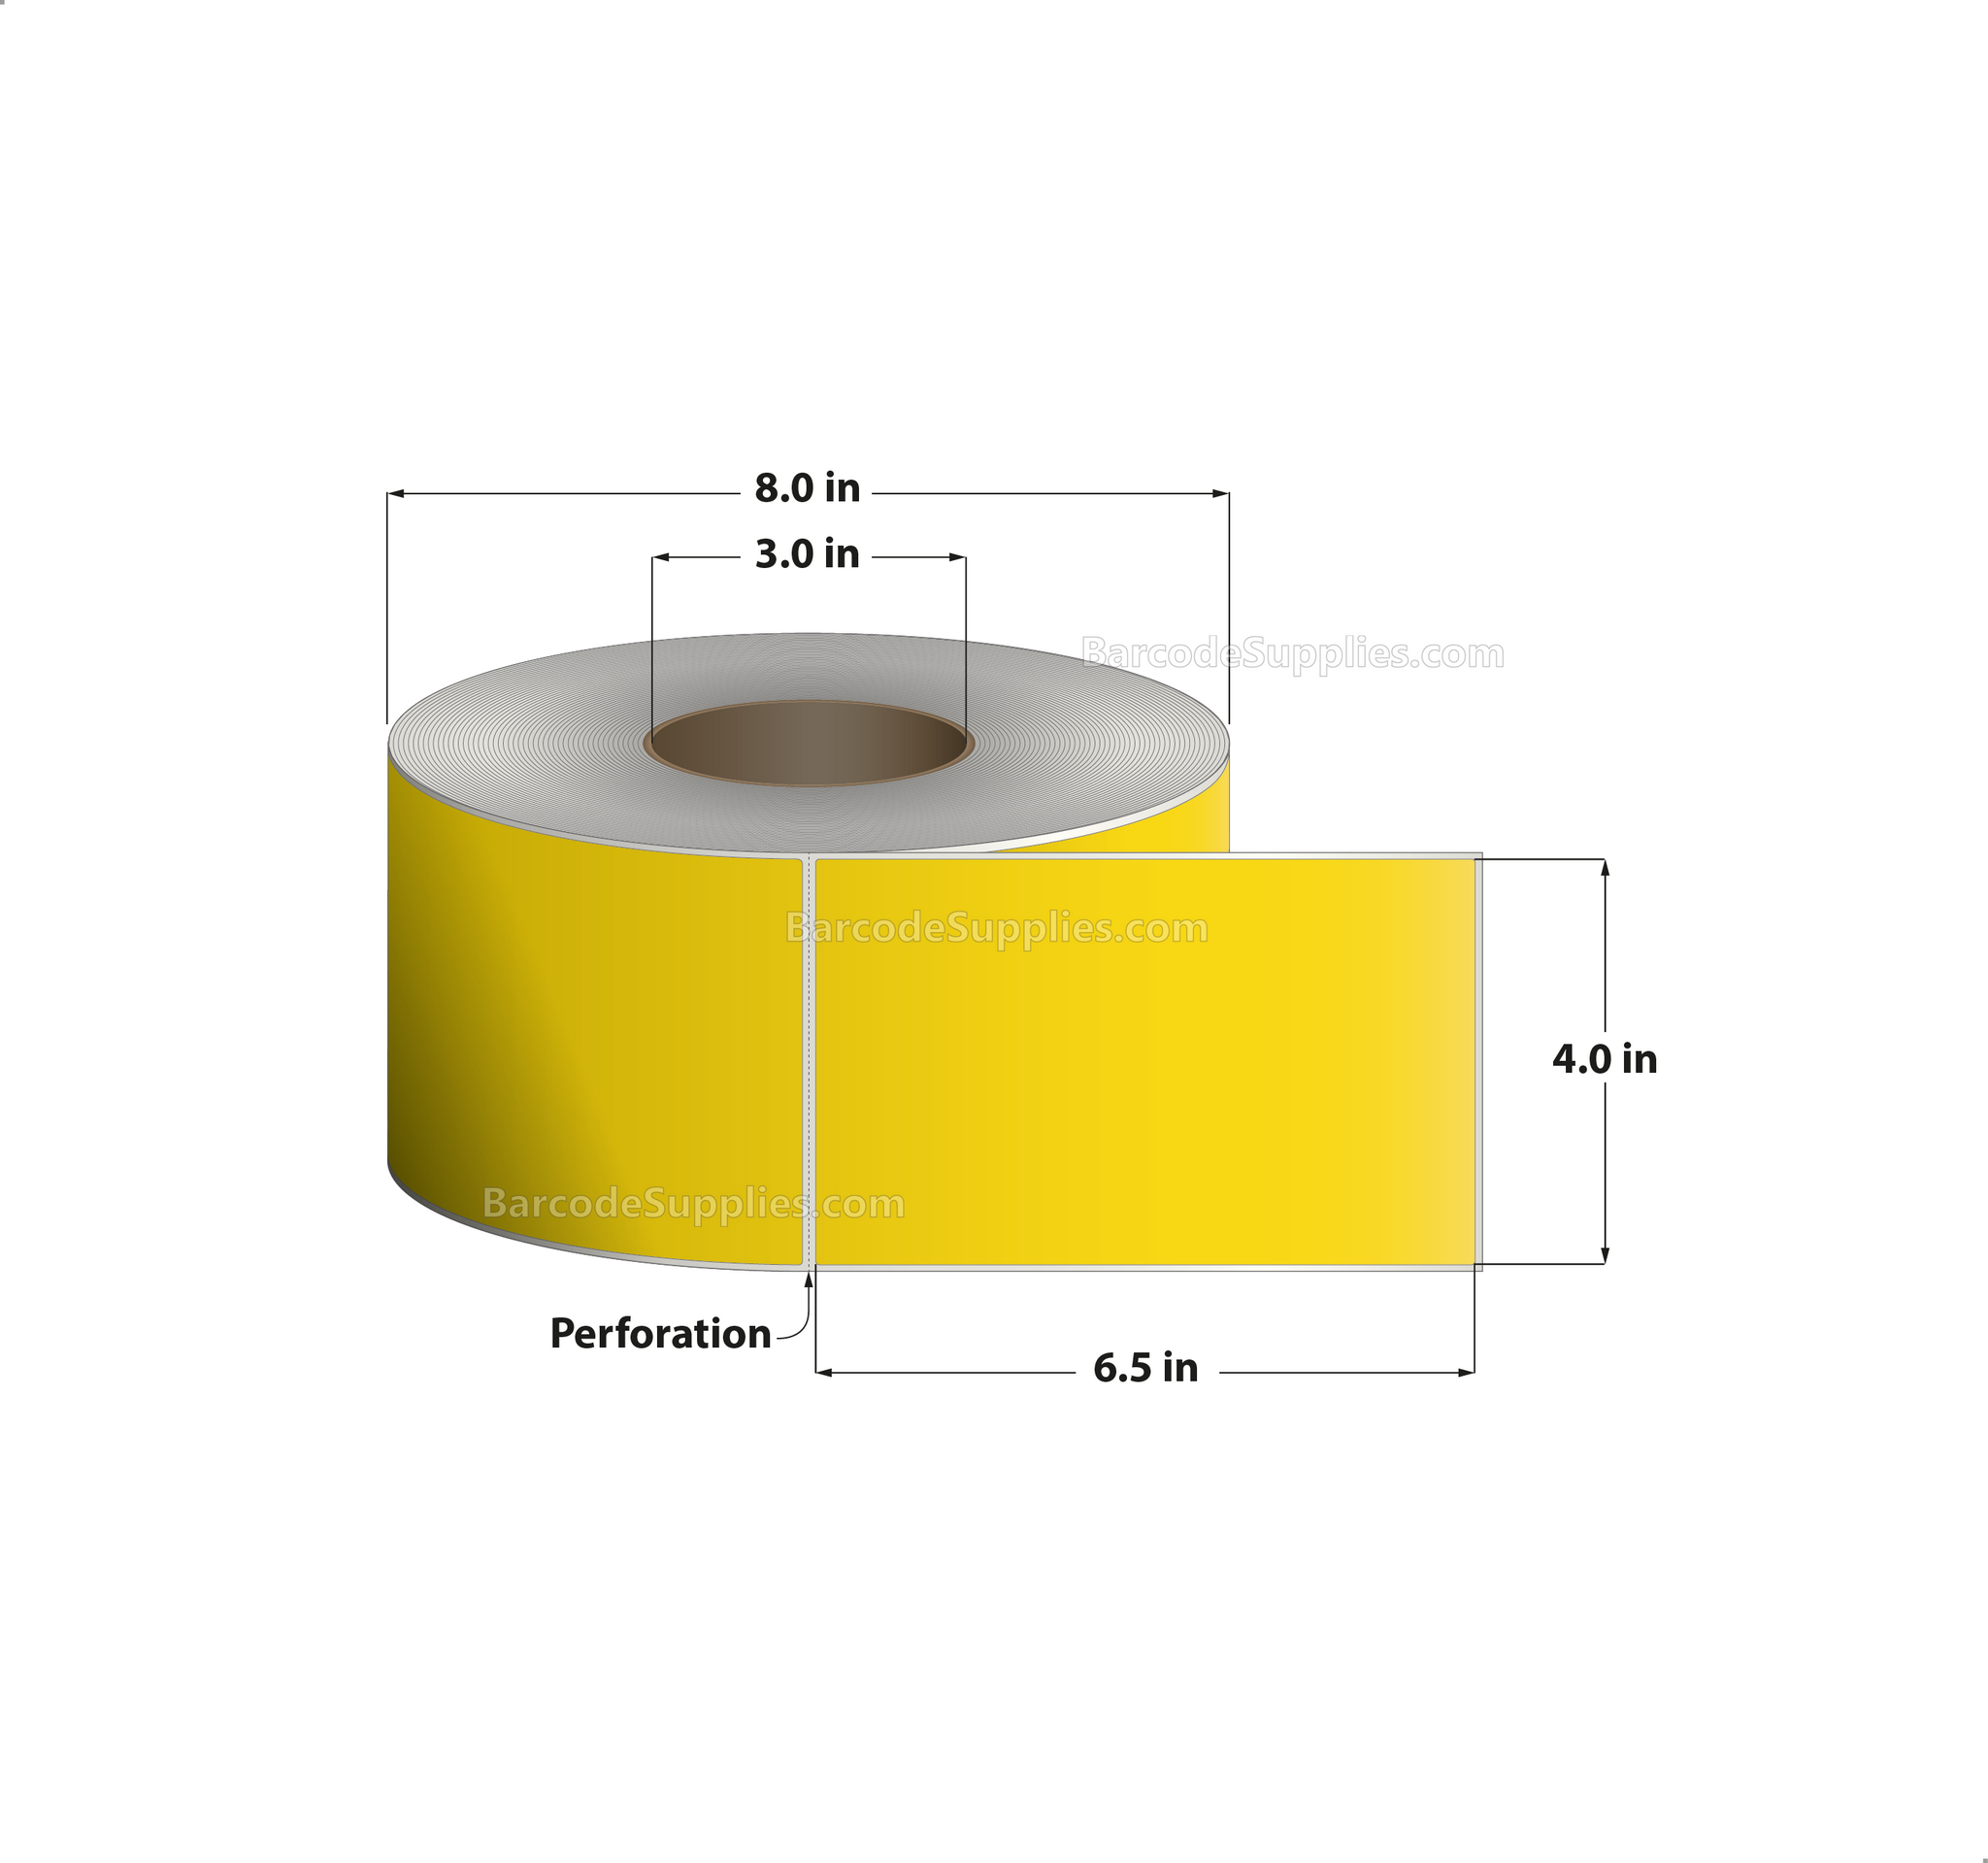 4 x 6.5 Thermal Transfer Pantone Yellow Labels With Permanent Acrylic Adhesive - Perforated - 900 Labels Per Roll - Carton Of 4 Rolls - 3600 Labels Total - MPN: TH465-1PY